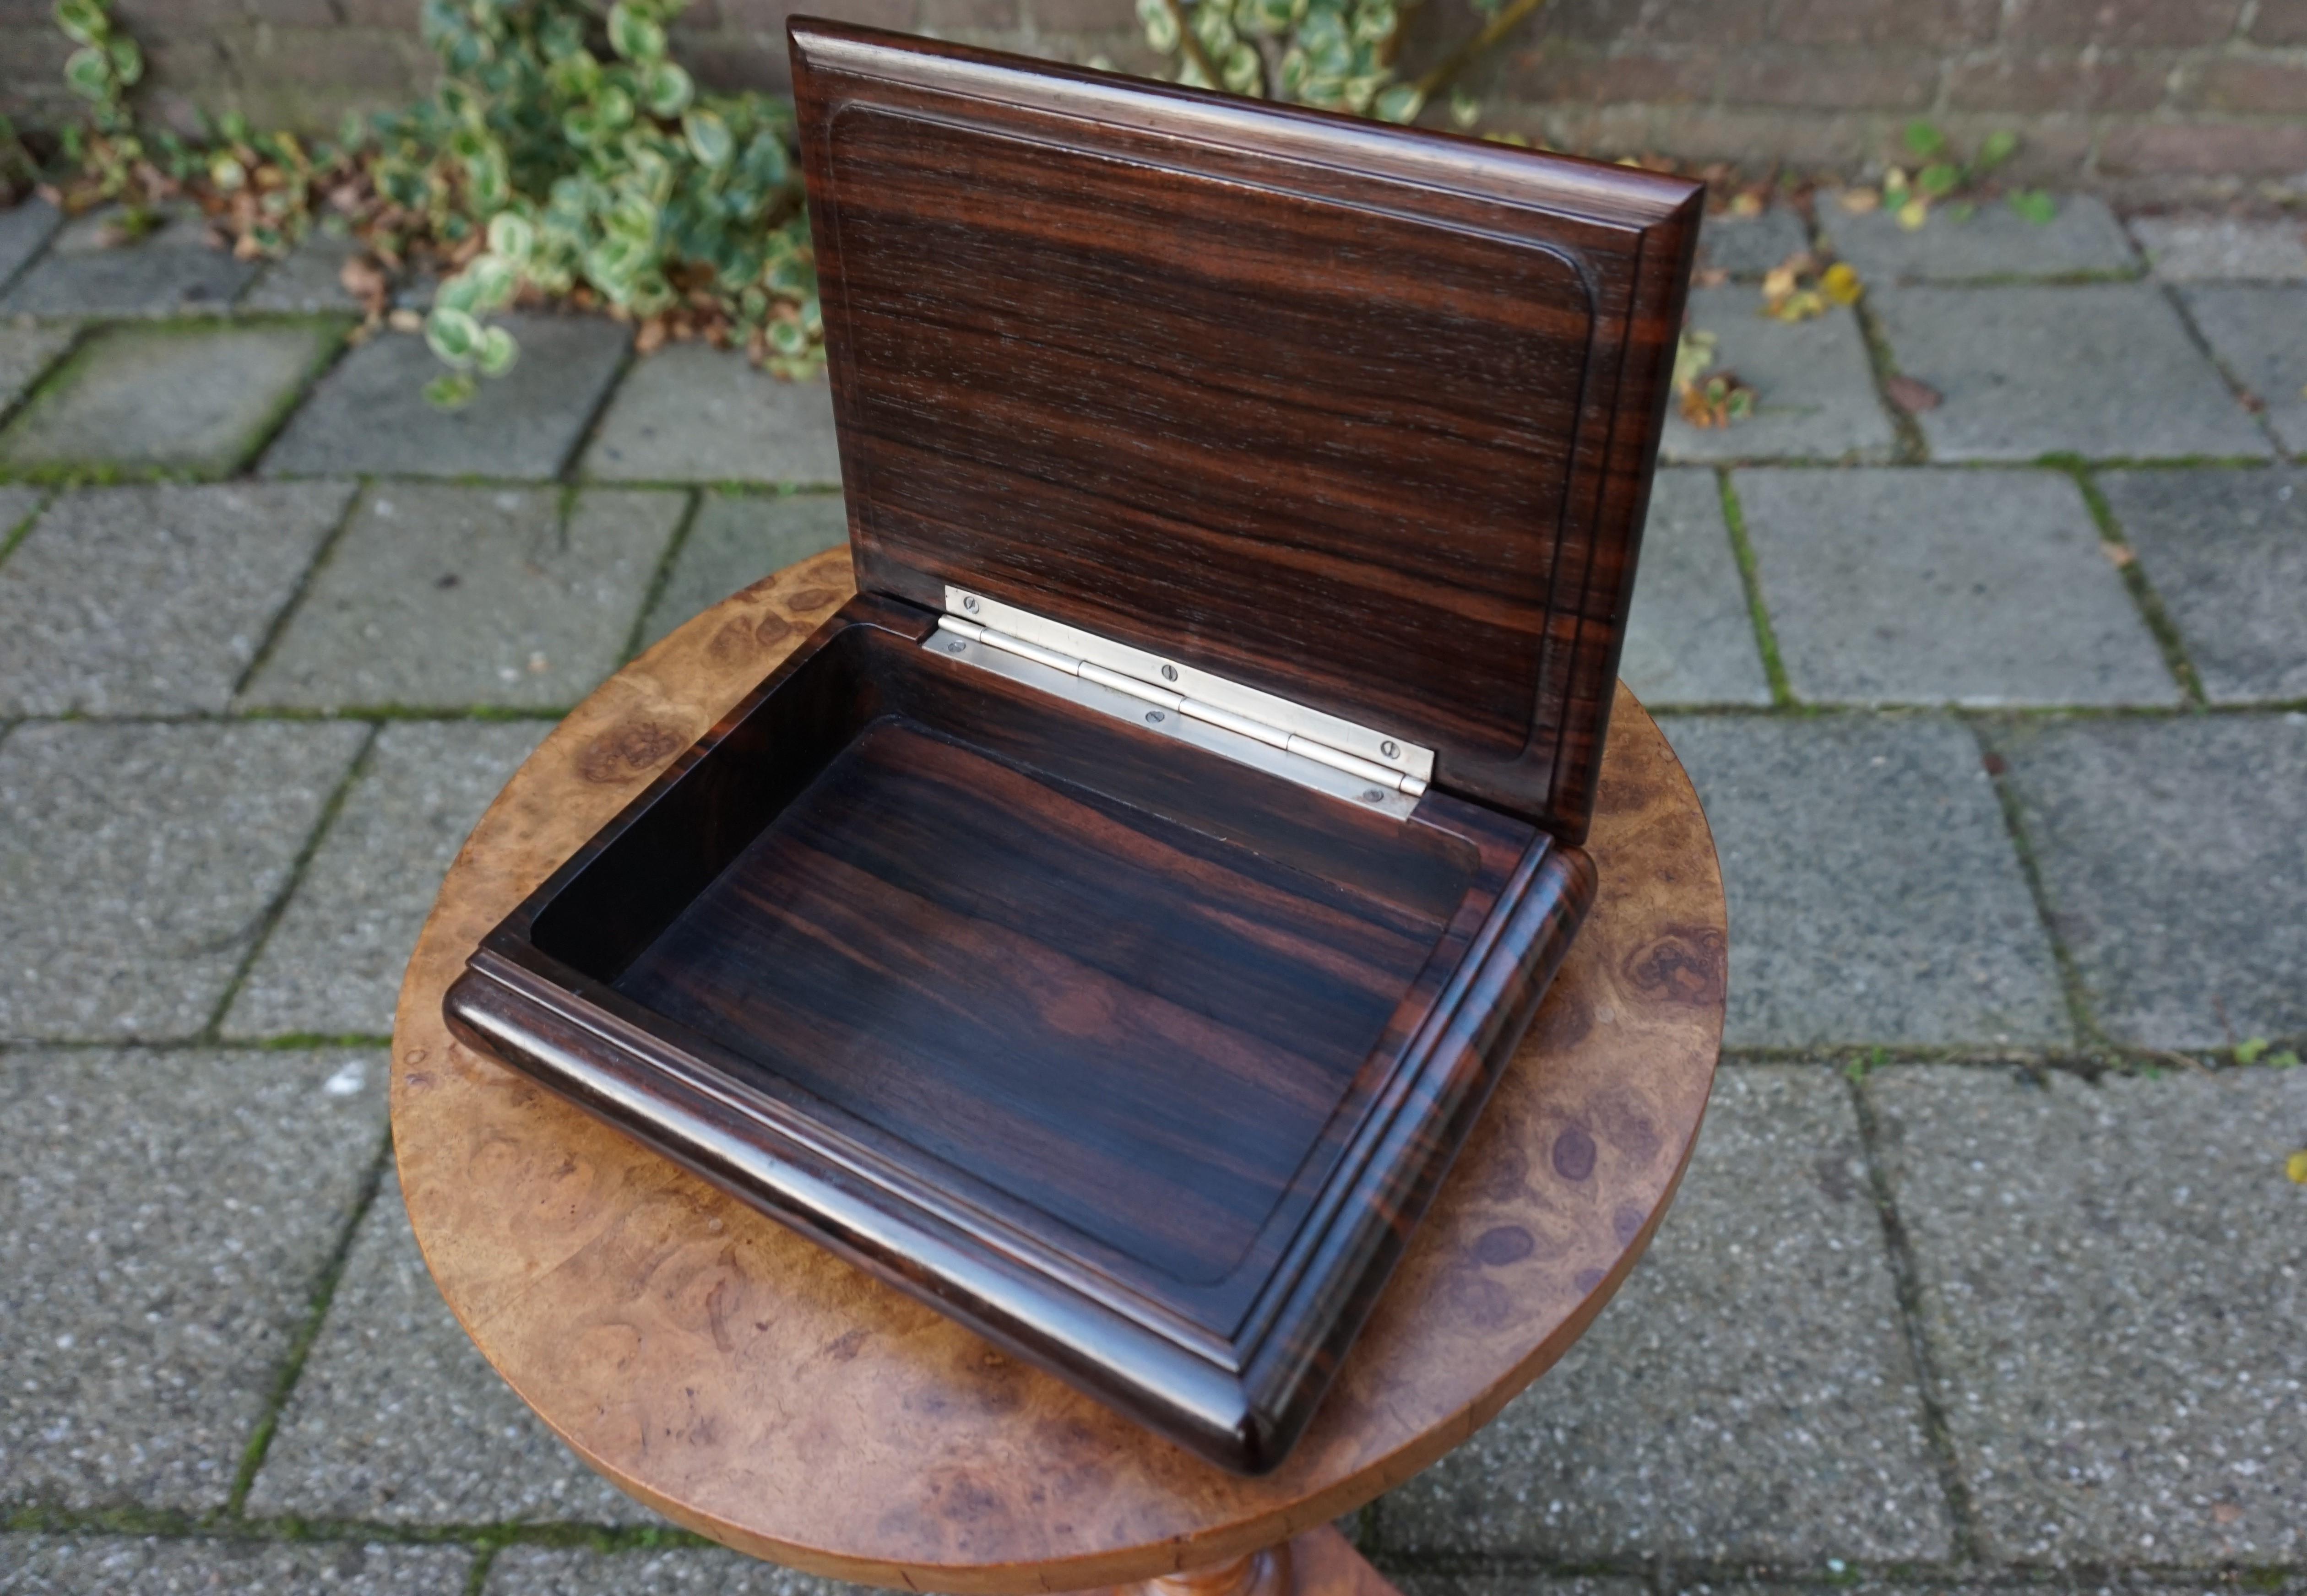 Stunning shape and practical size coromandel wood box from the Art Deco era.

This exceptional and highly stylish antique box too is even better looking in real life. Completely handcrafted out of the most beautiful coromandel wood only, this work